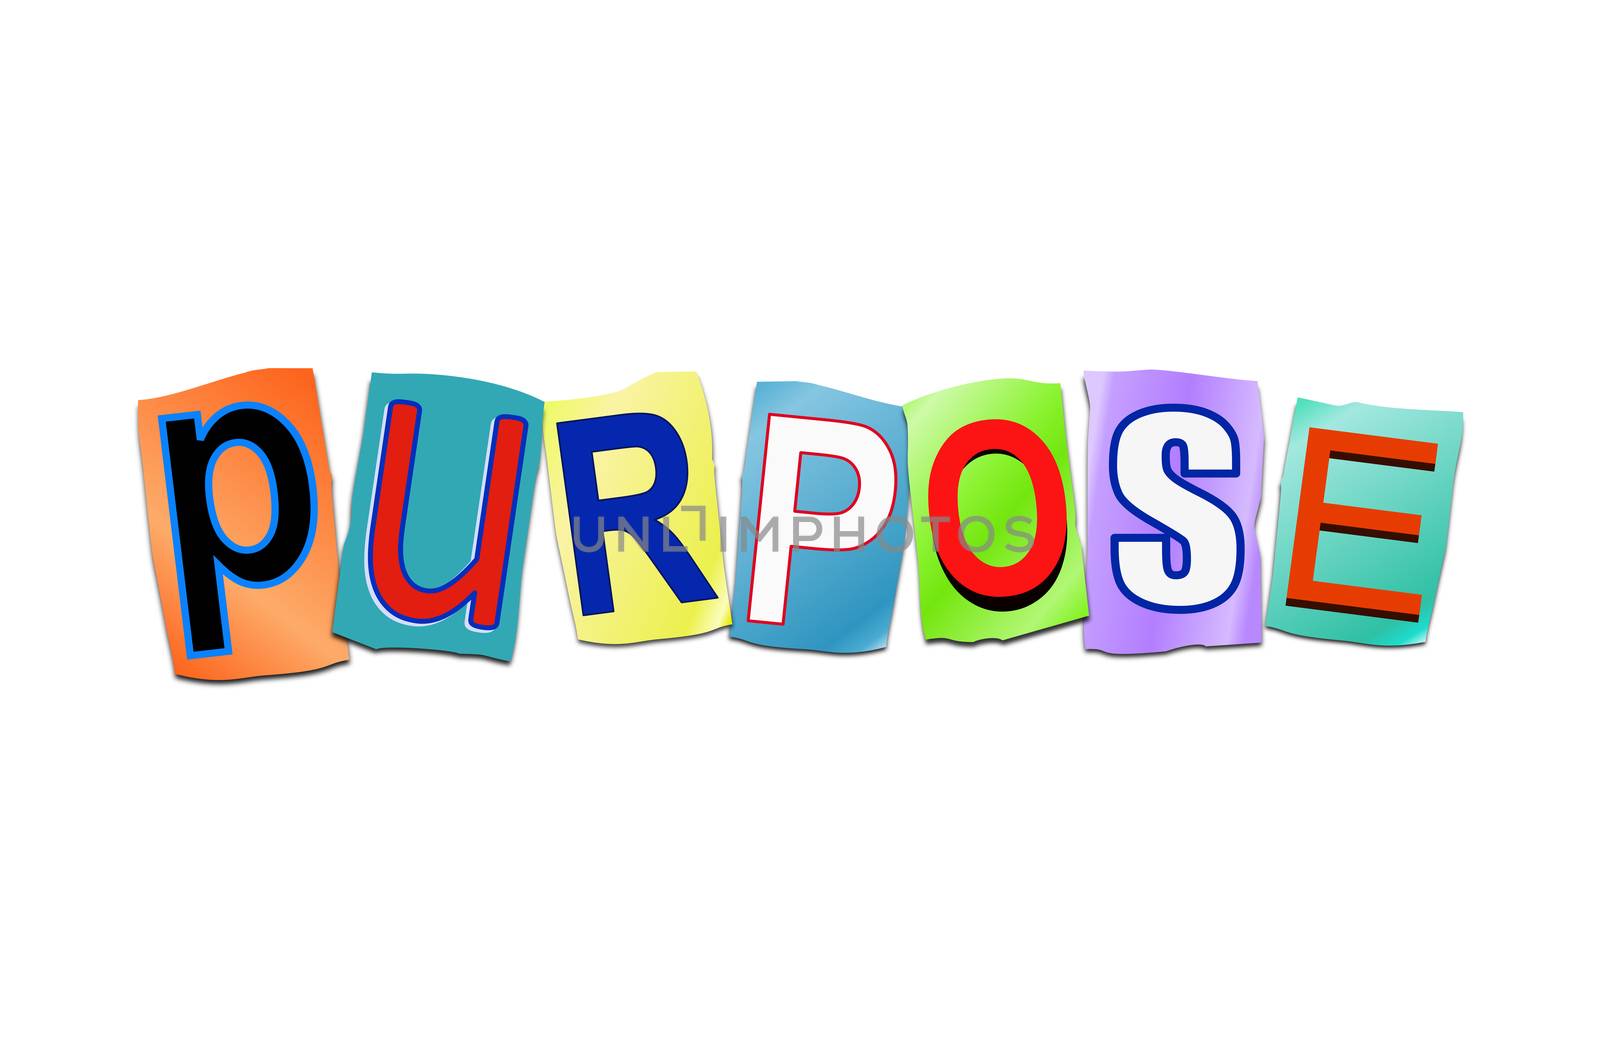 Illustration depicting a set of cut out printed letters arranged to form the word purpose.